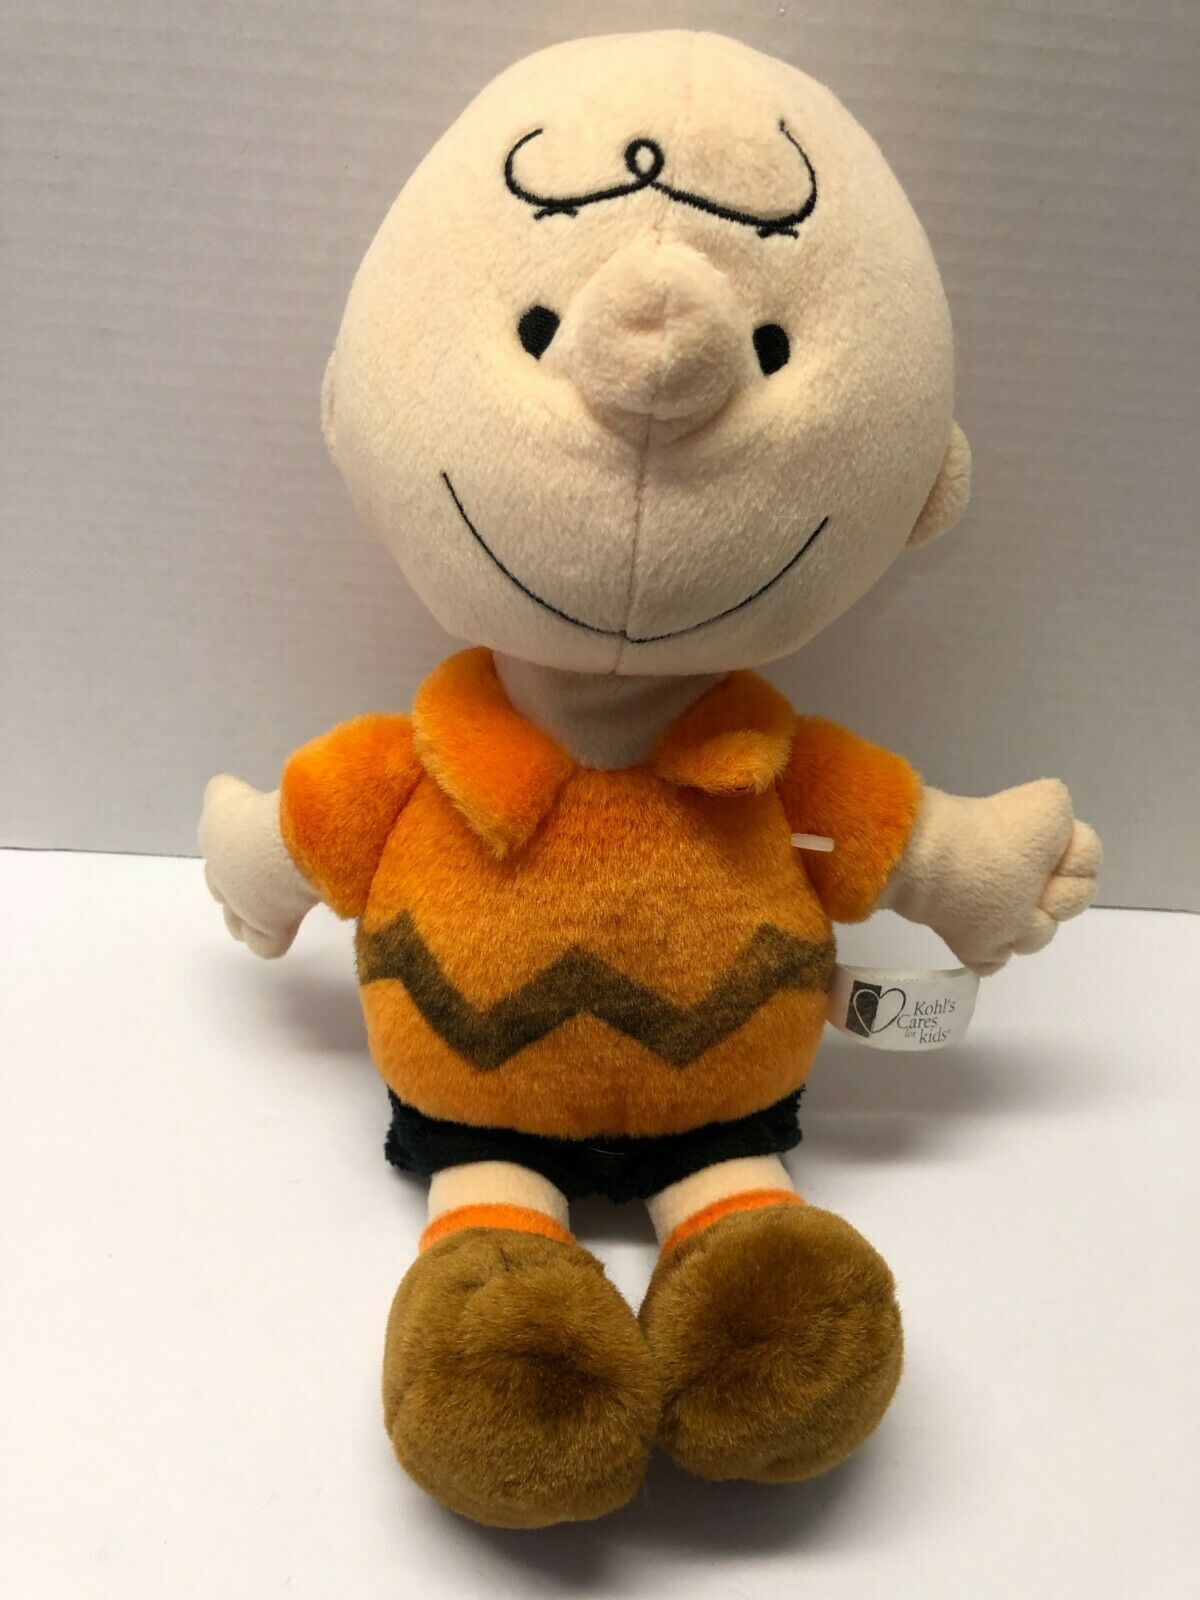 Primary image for Peanuts CHARLIE BROWN 13" Kohl's Plush Figure